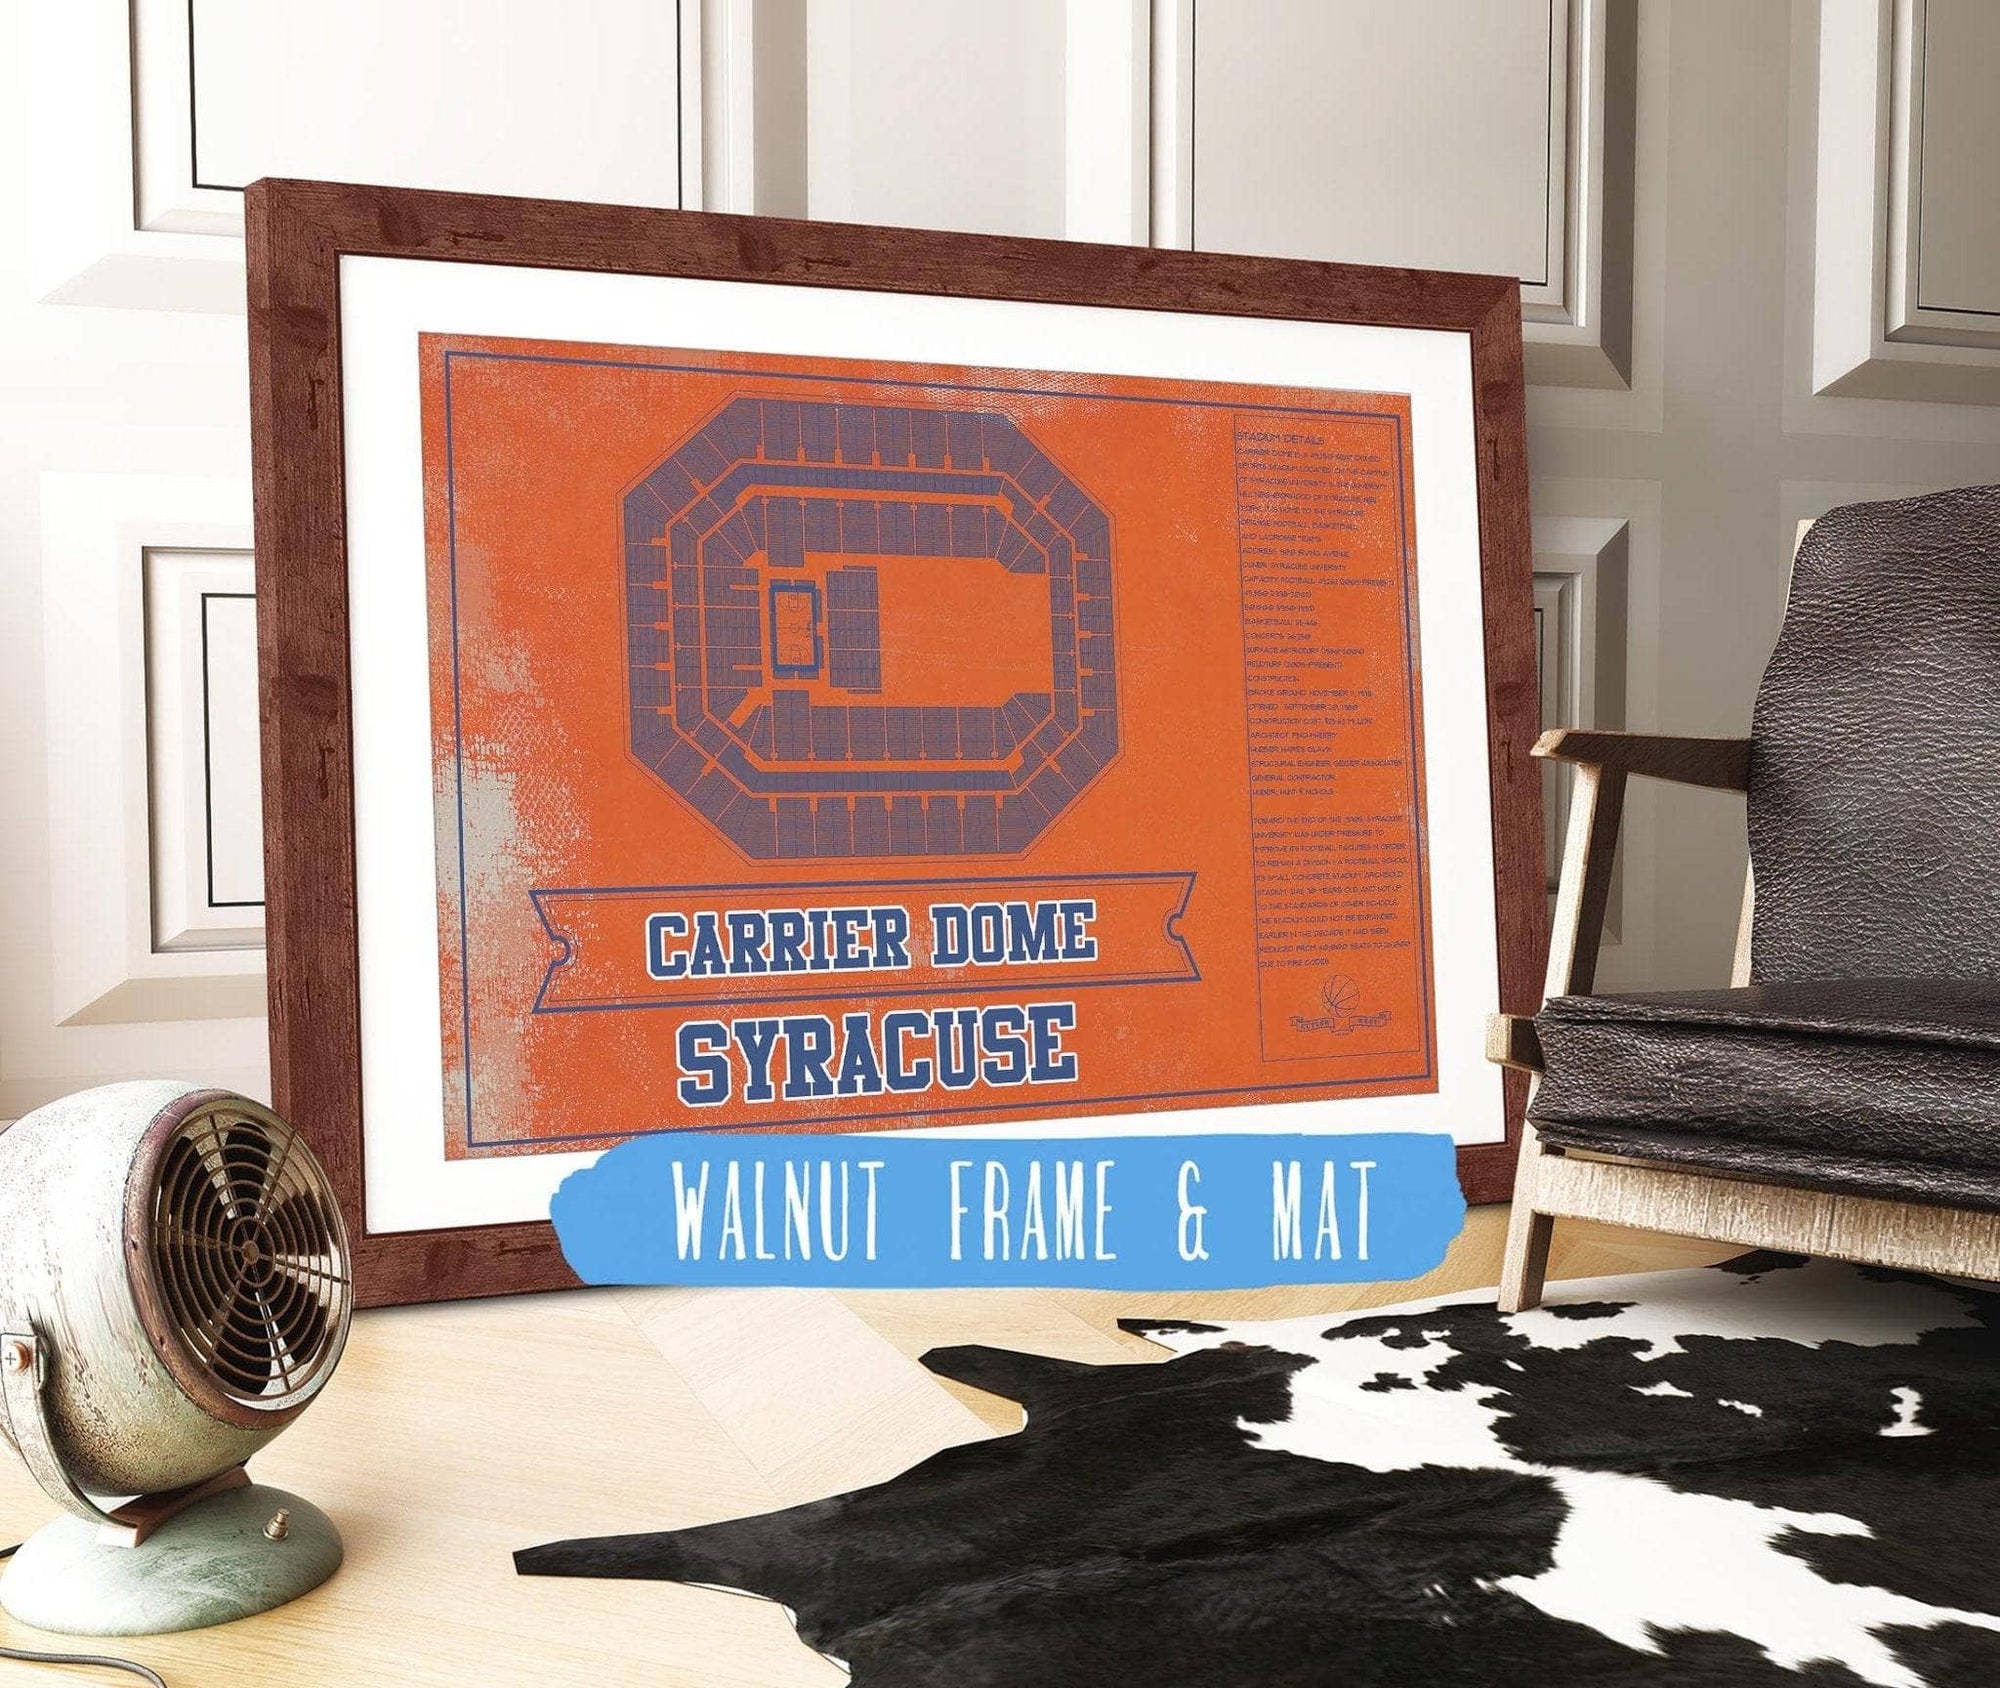 Cutler West Basketball Collection 14" x 11" / Walnut Frame & Mat Syracuse Orange - Carrier Dome Seating Chart - College Basketball Blueprint Team Color Art 918947080-TOP